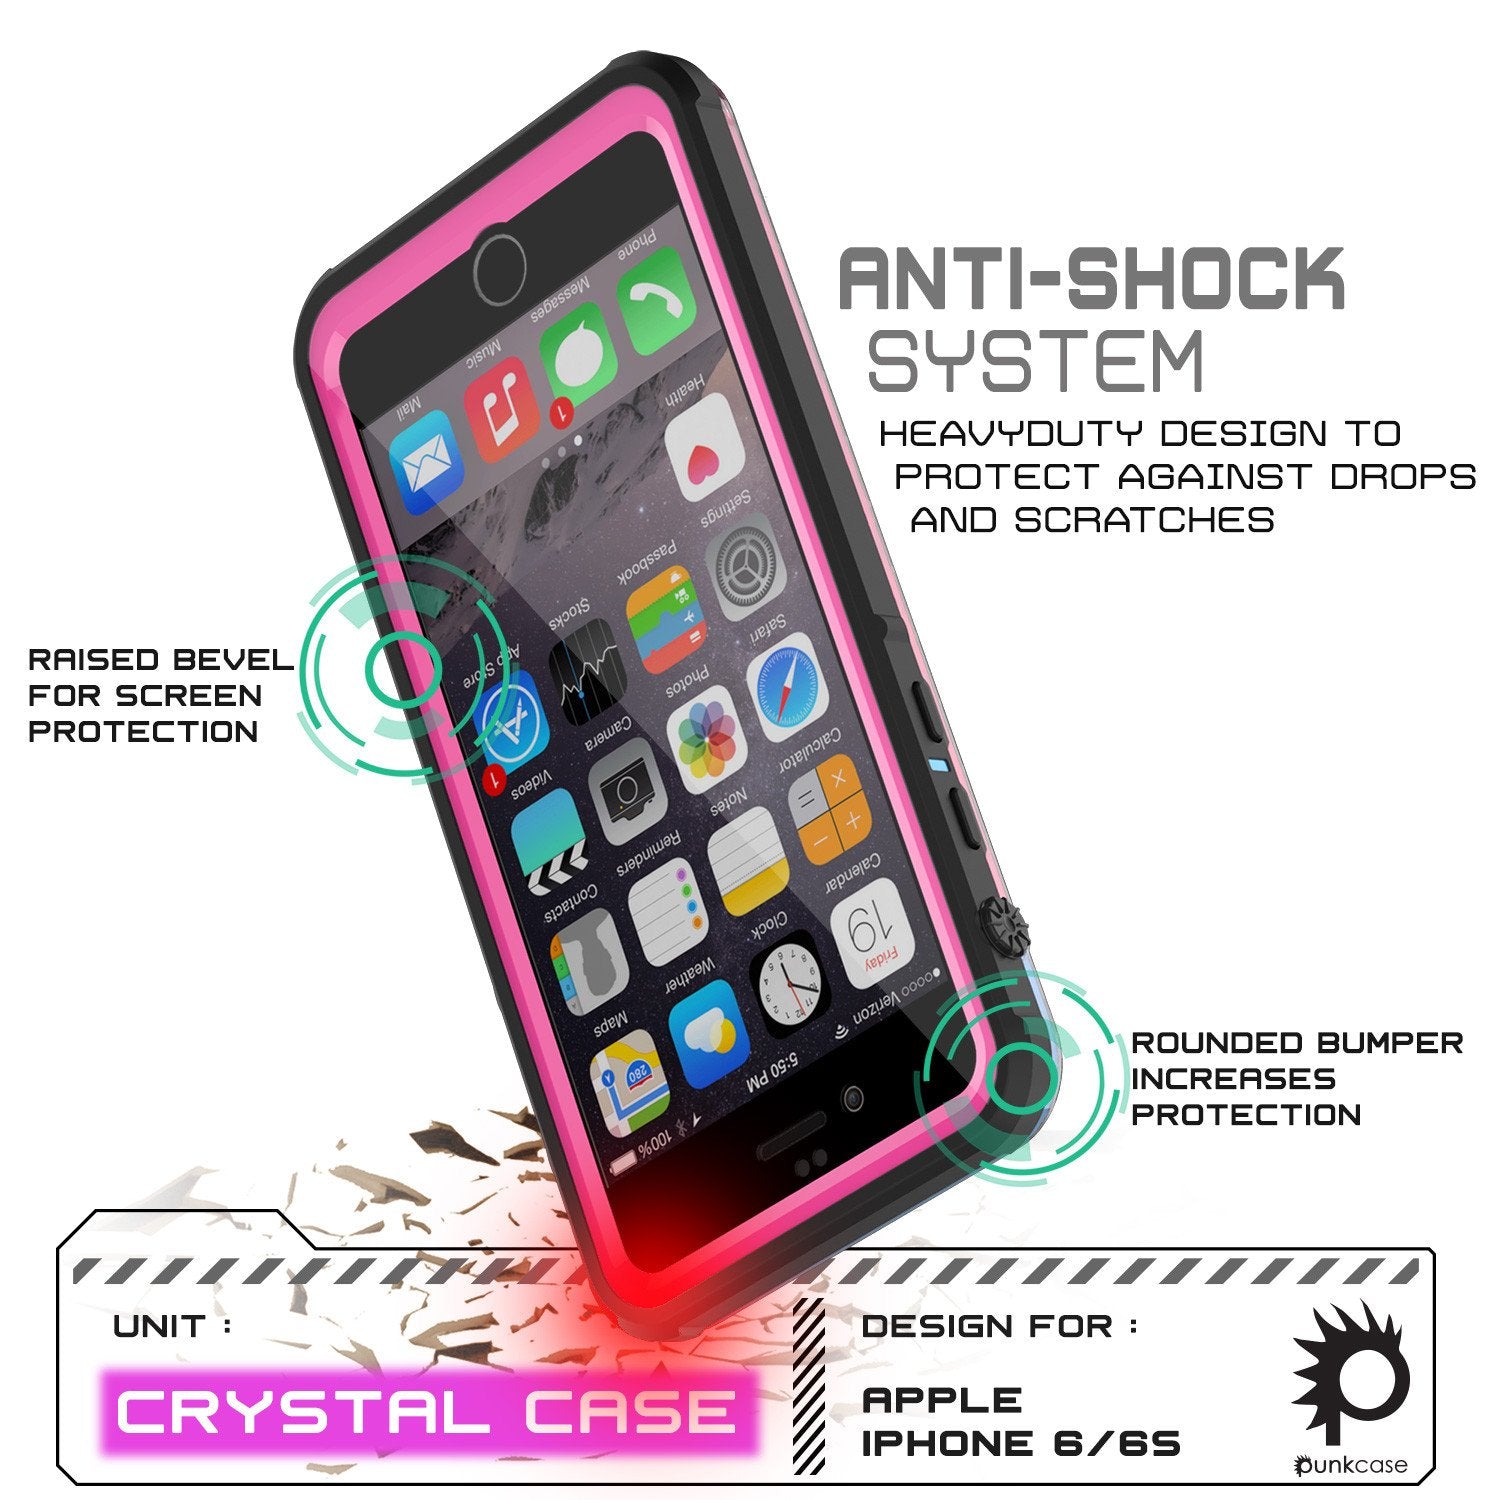 iPhone 6/6S Waterproof Case, PUNKcase CRYSTAL Pink W/ Attached Screen Protector  | Warranty - PunkCase NZ